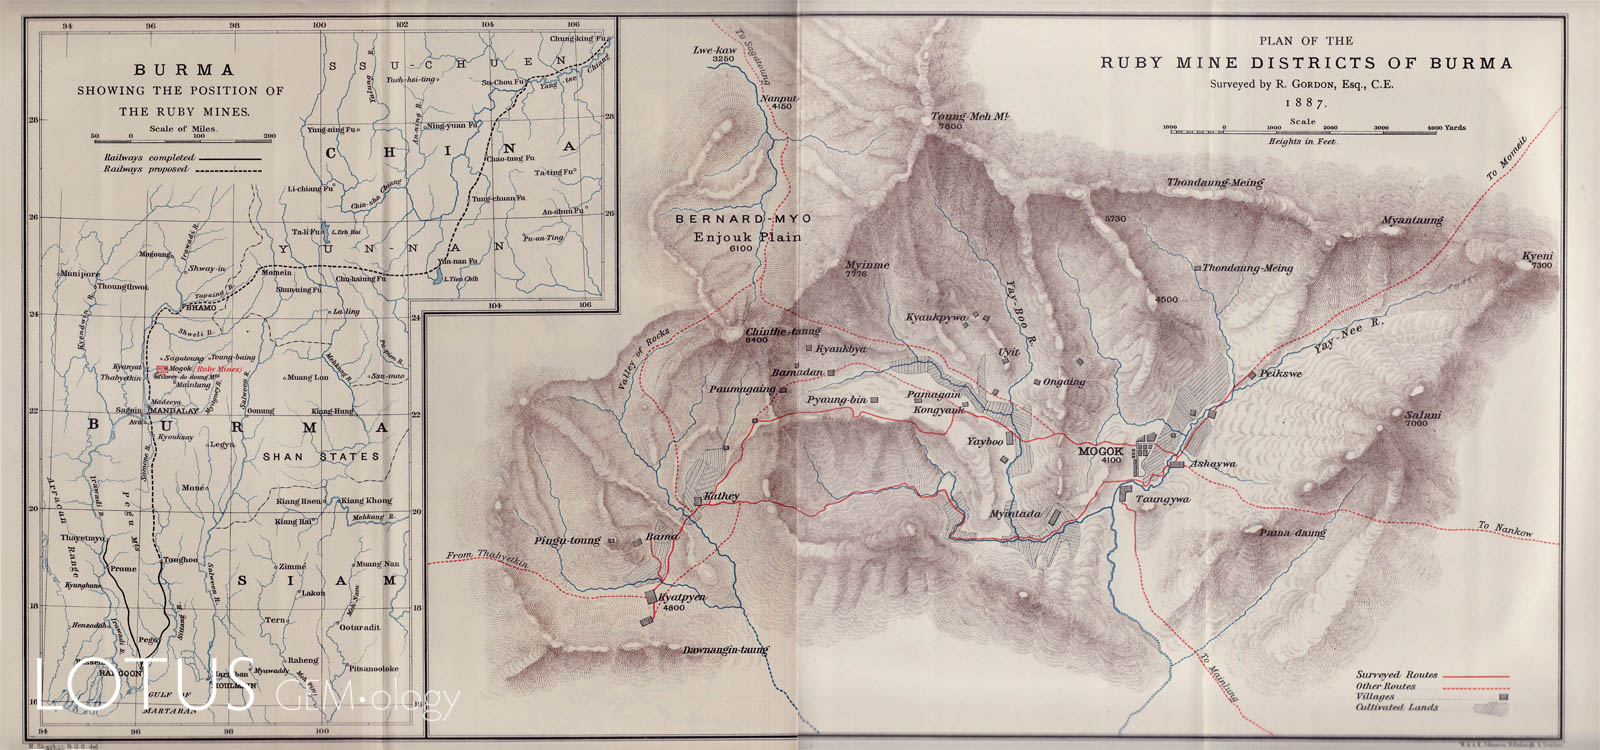 Robert Gordon was on the original British expedition to Mogok (Myanmar). His map, published by the Royal Geographical Society in 1888, was the first detailed map of the region. Click on the map for a larger image.